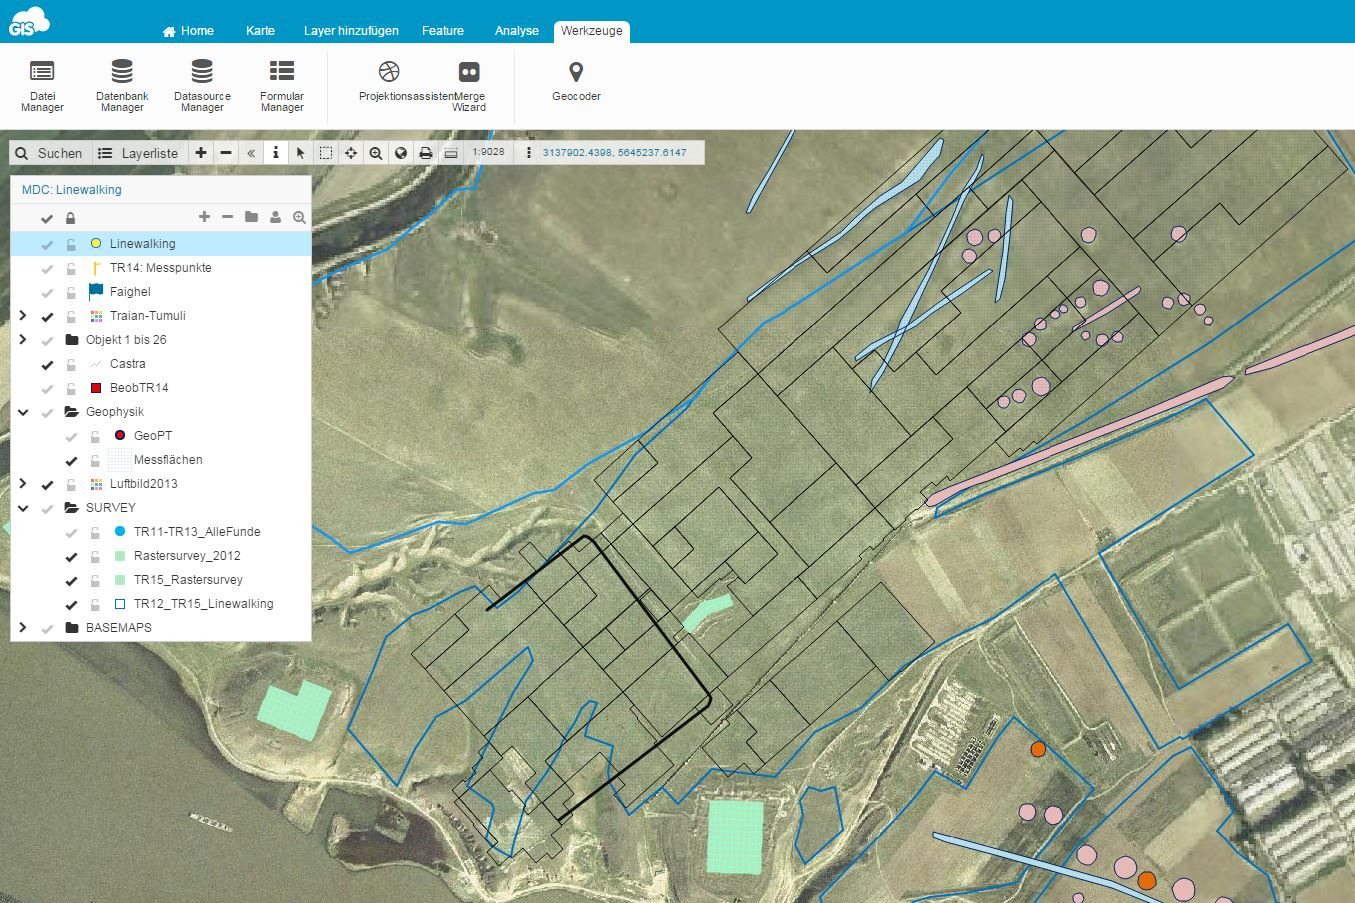 GIS in Archaeology: Mapping Roman and Byzantine Ruins (Case Study)